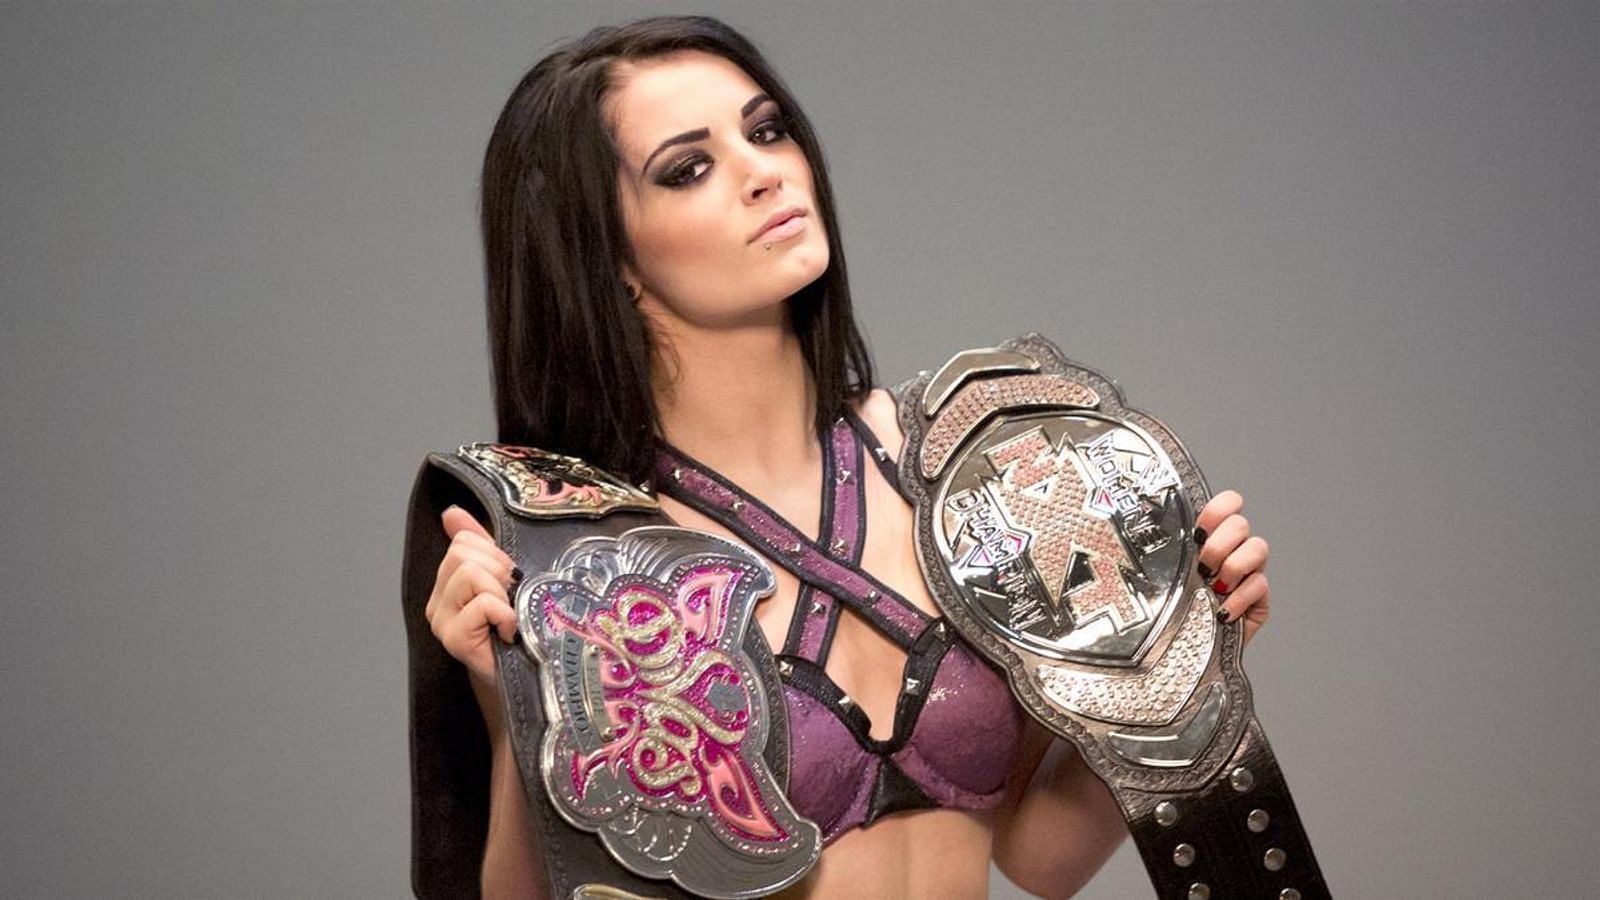 Paige won the Divas Championship on her first match in the main roster